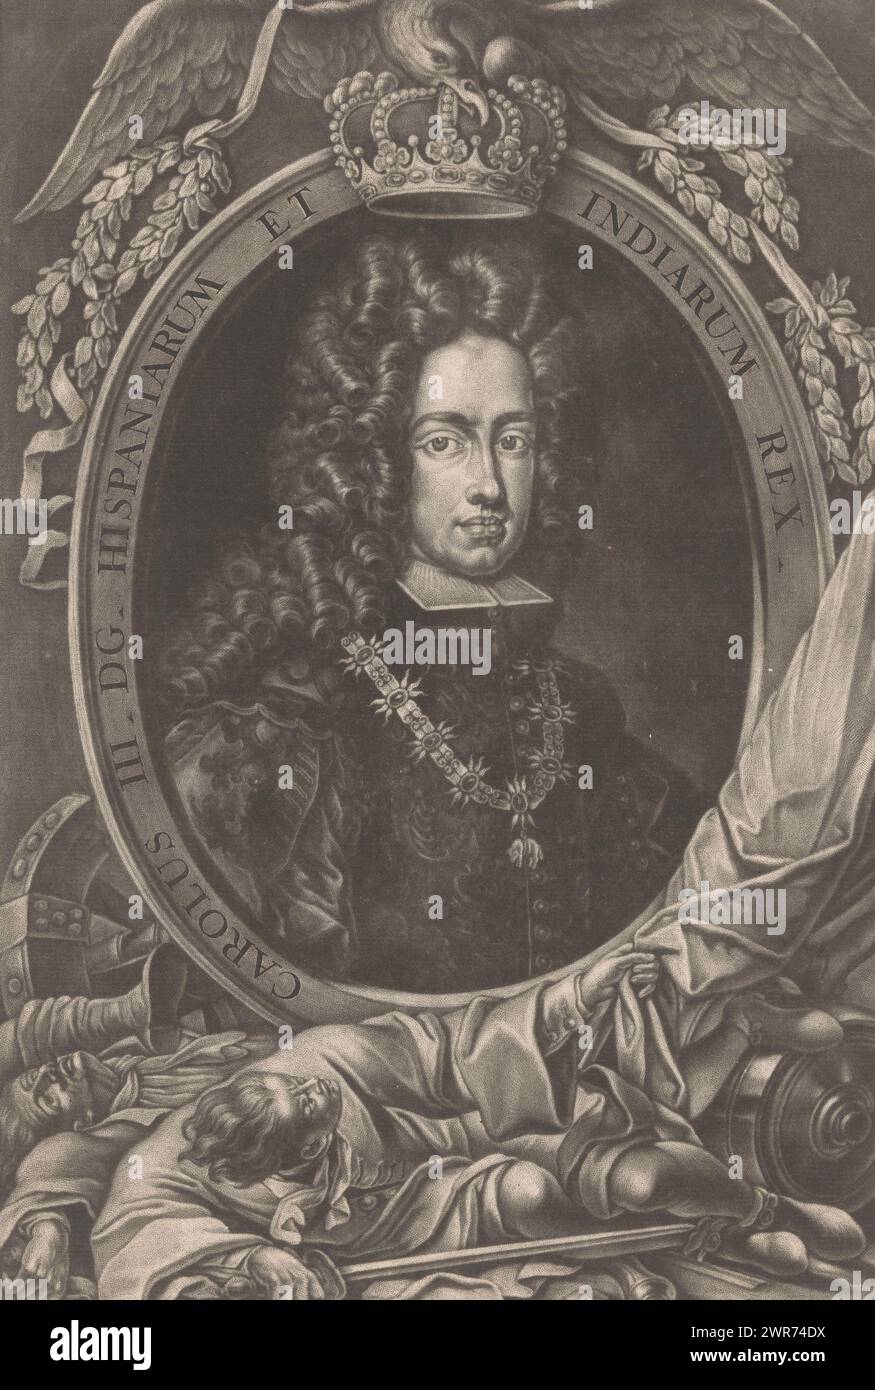 Portrait of Charles VI, Emperor of the Holy Roman Empire, print maker: Christoph Weigel, publisher: Christoph Weigel, 1695 - 1725, paper, height 331 mm × width 226 mm, print Stock Photo